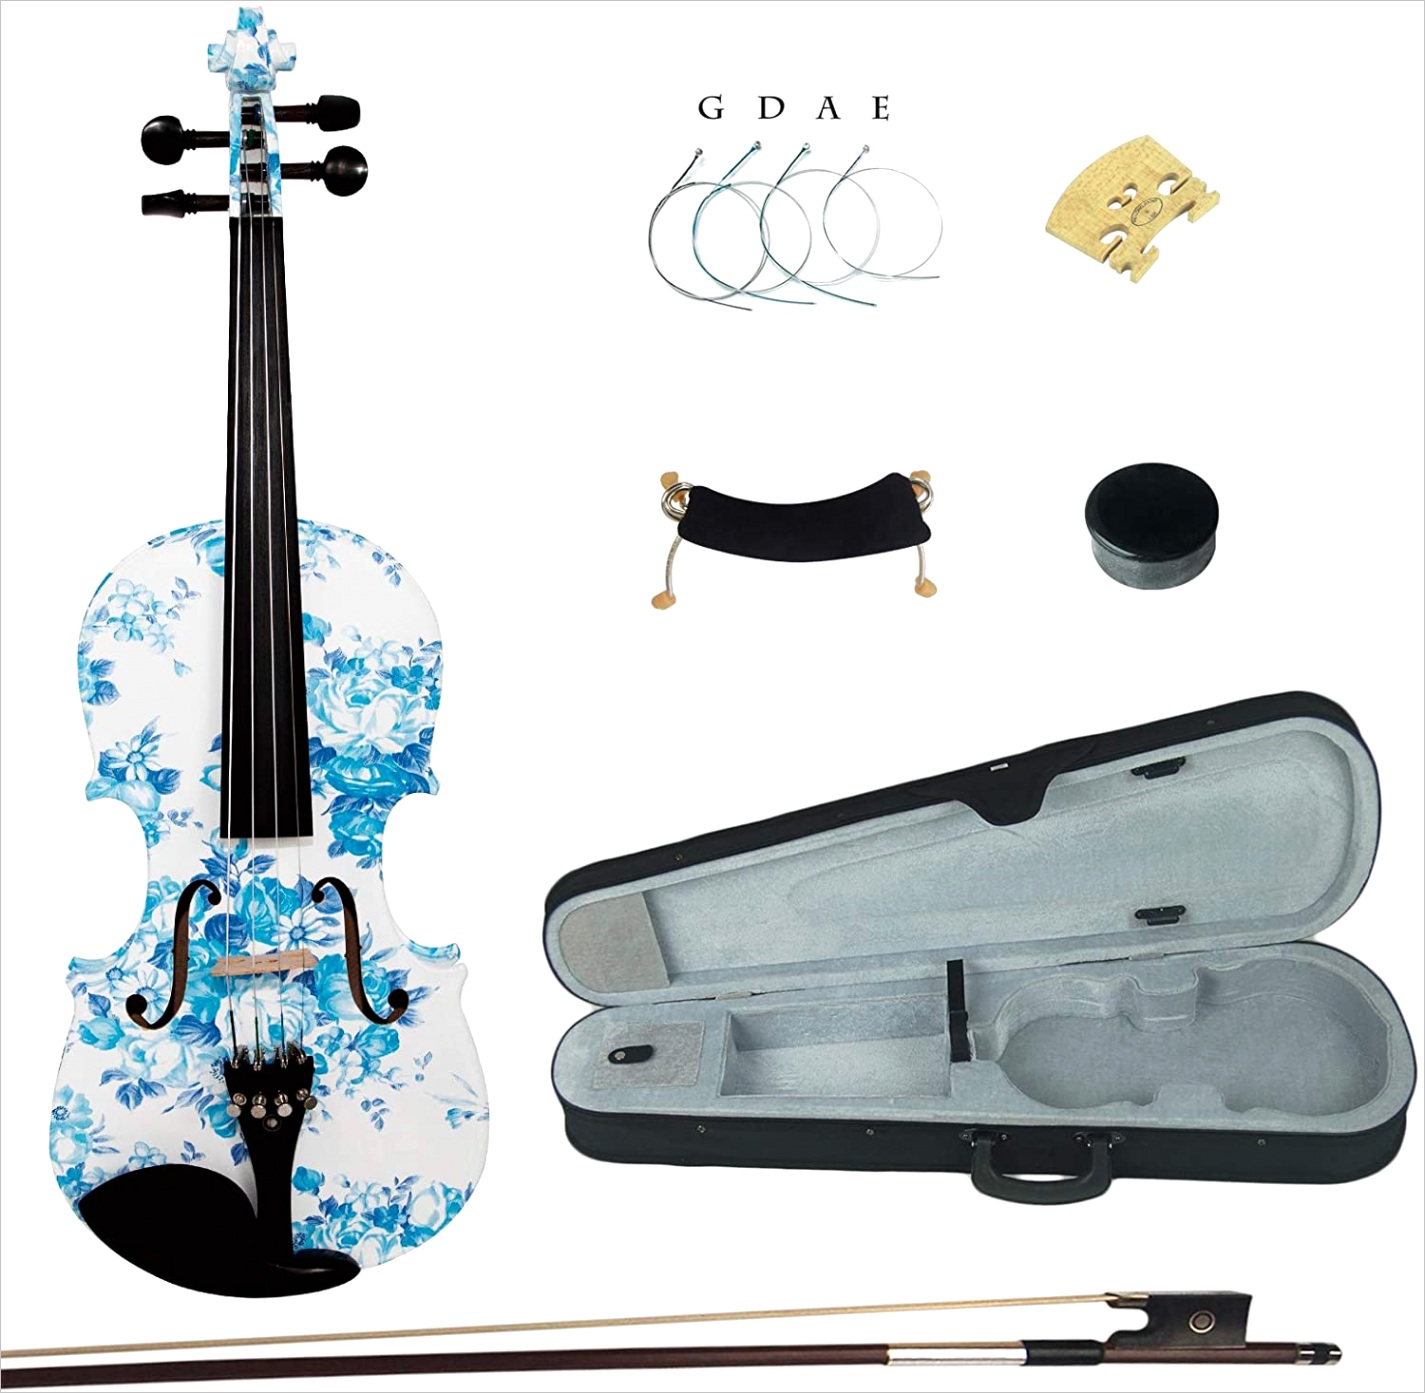 44 white blue flower colored ebony fitted solid wood violin kit with case shoulder rest bow rosin extra bridge and strings full size yz1201 id=2186c5f e1b456a2707a91ab8e